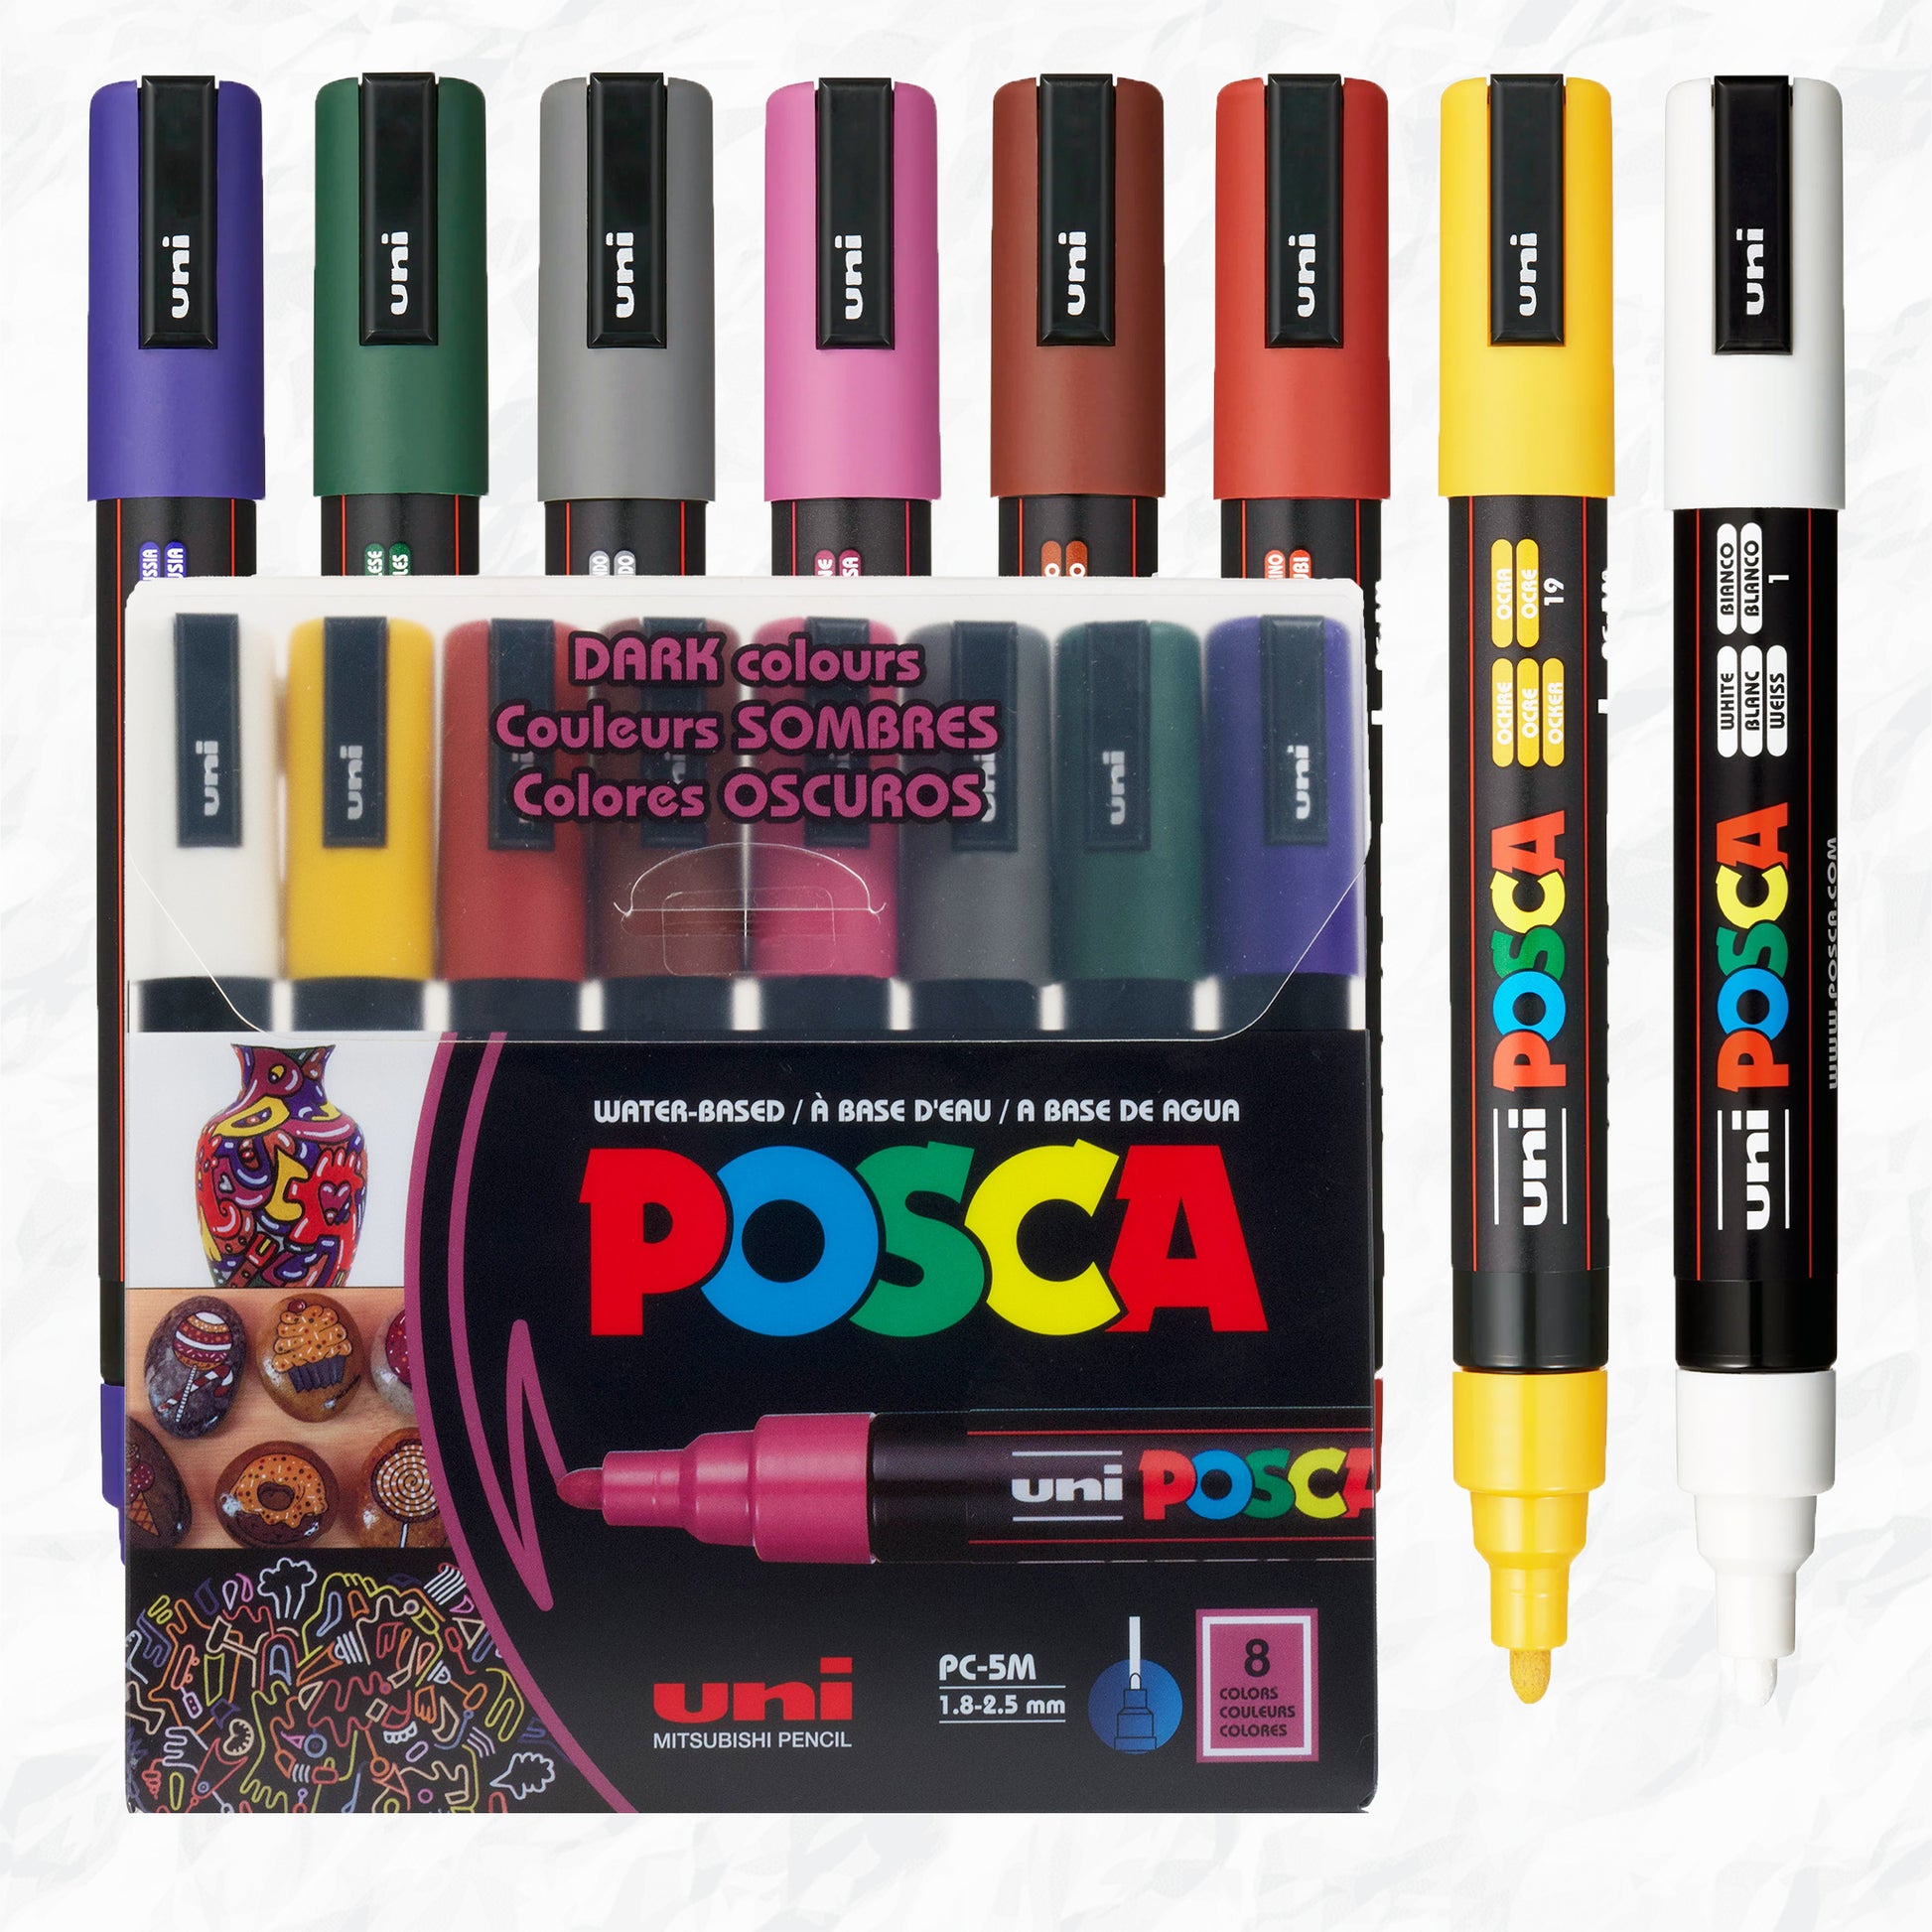 POSCA water-based art paint markers, size 5M medium round, eight piece pack in dark colors.